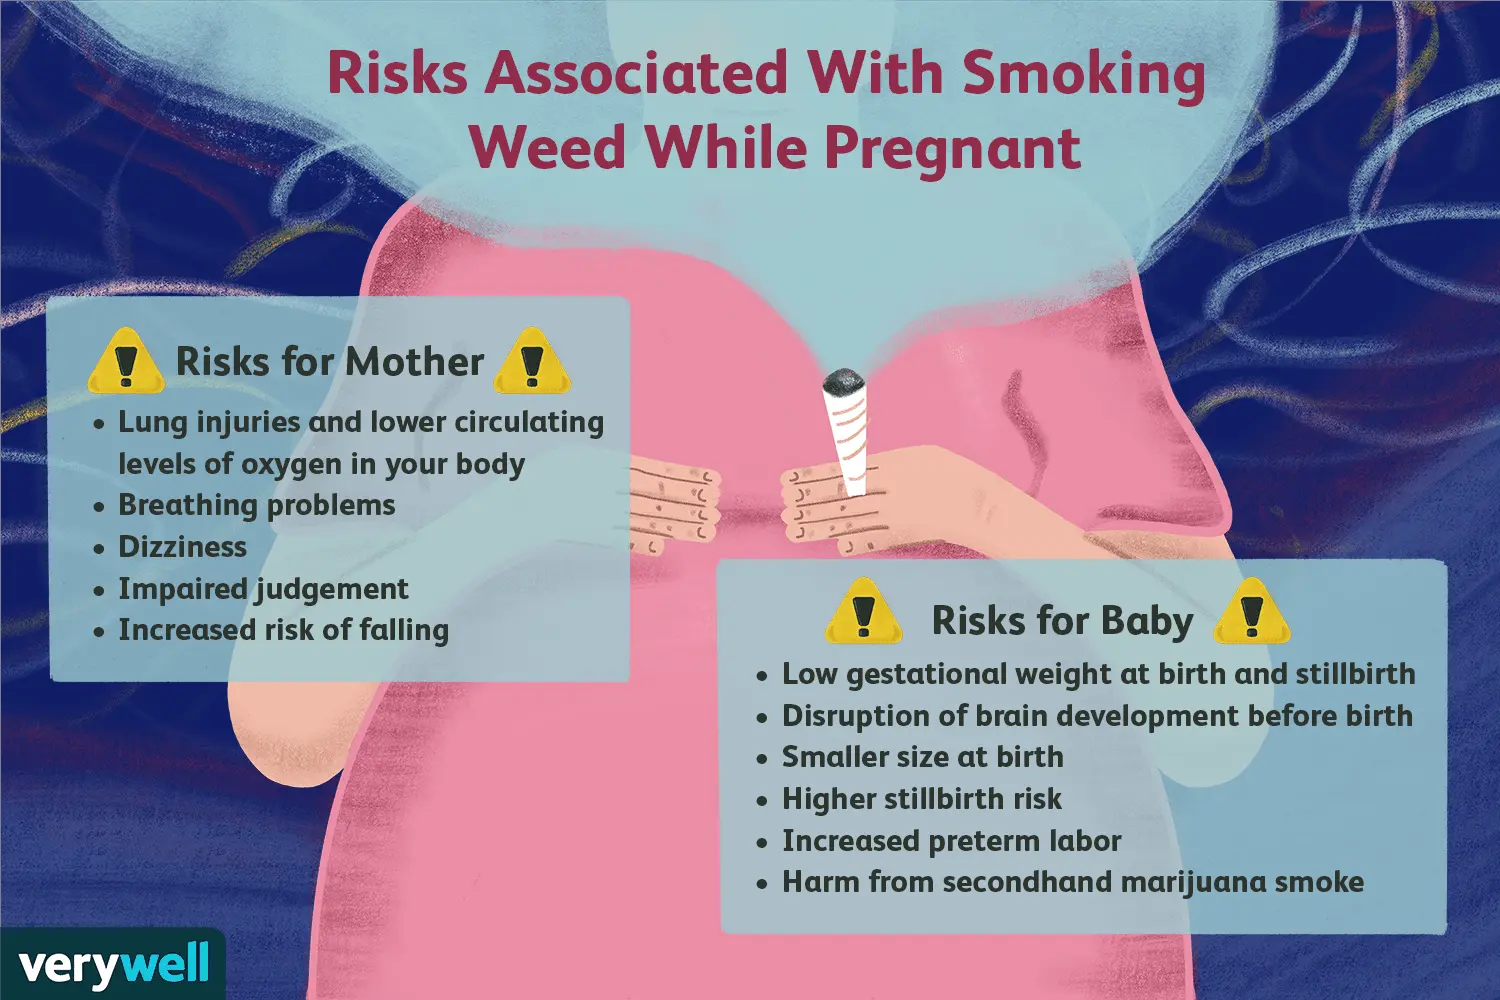 what if i smoked before knowing i was pregnant - What happens if you smoke without knowing you're pregnant